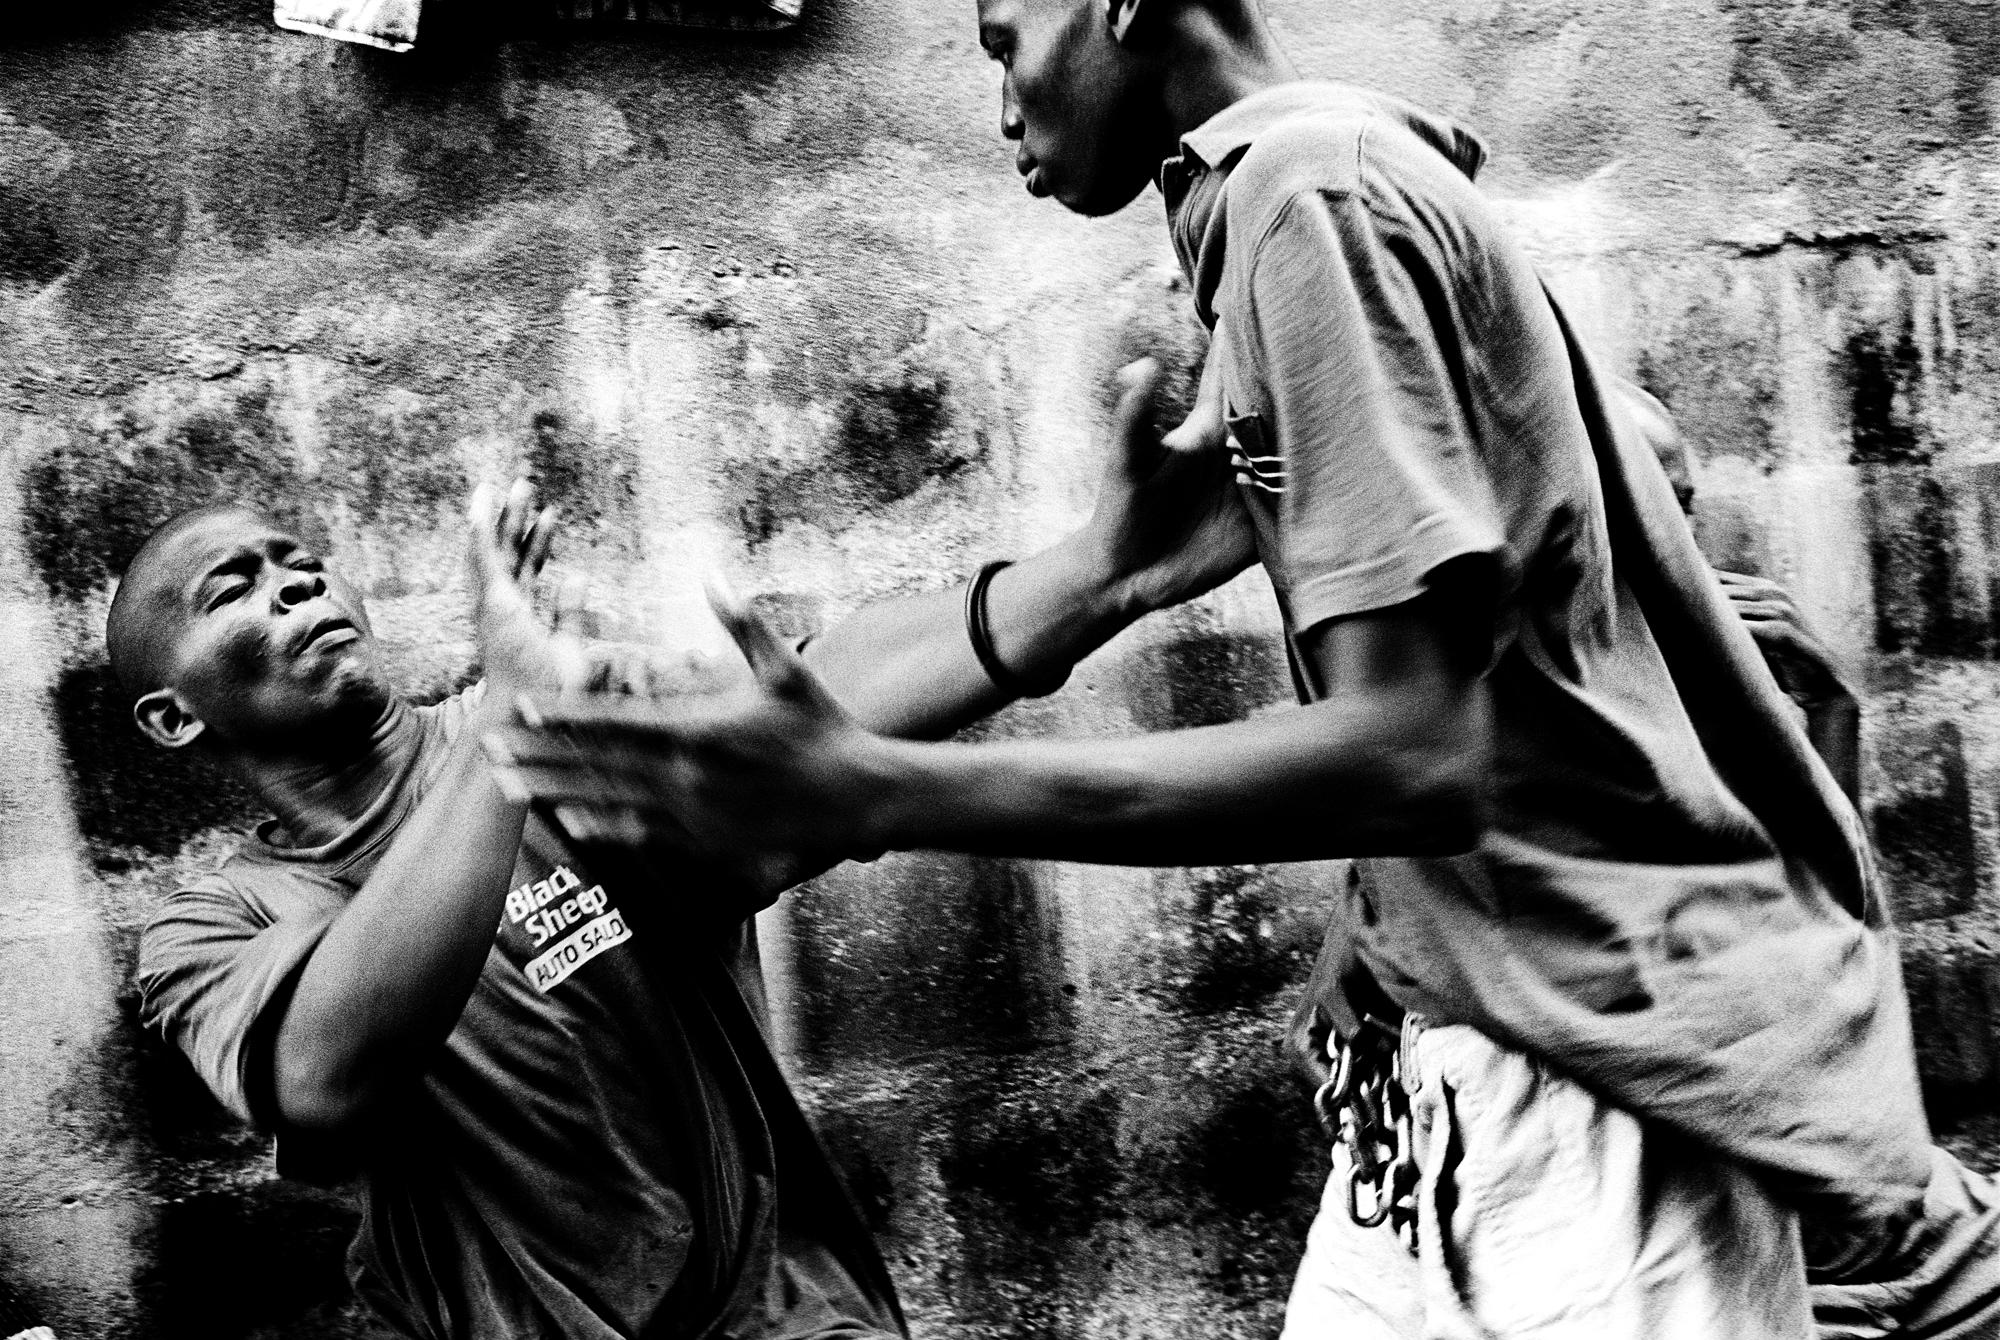 City of rest - SIERRA LEONE Freetown
Two young men fighting at the City...